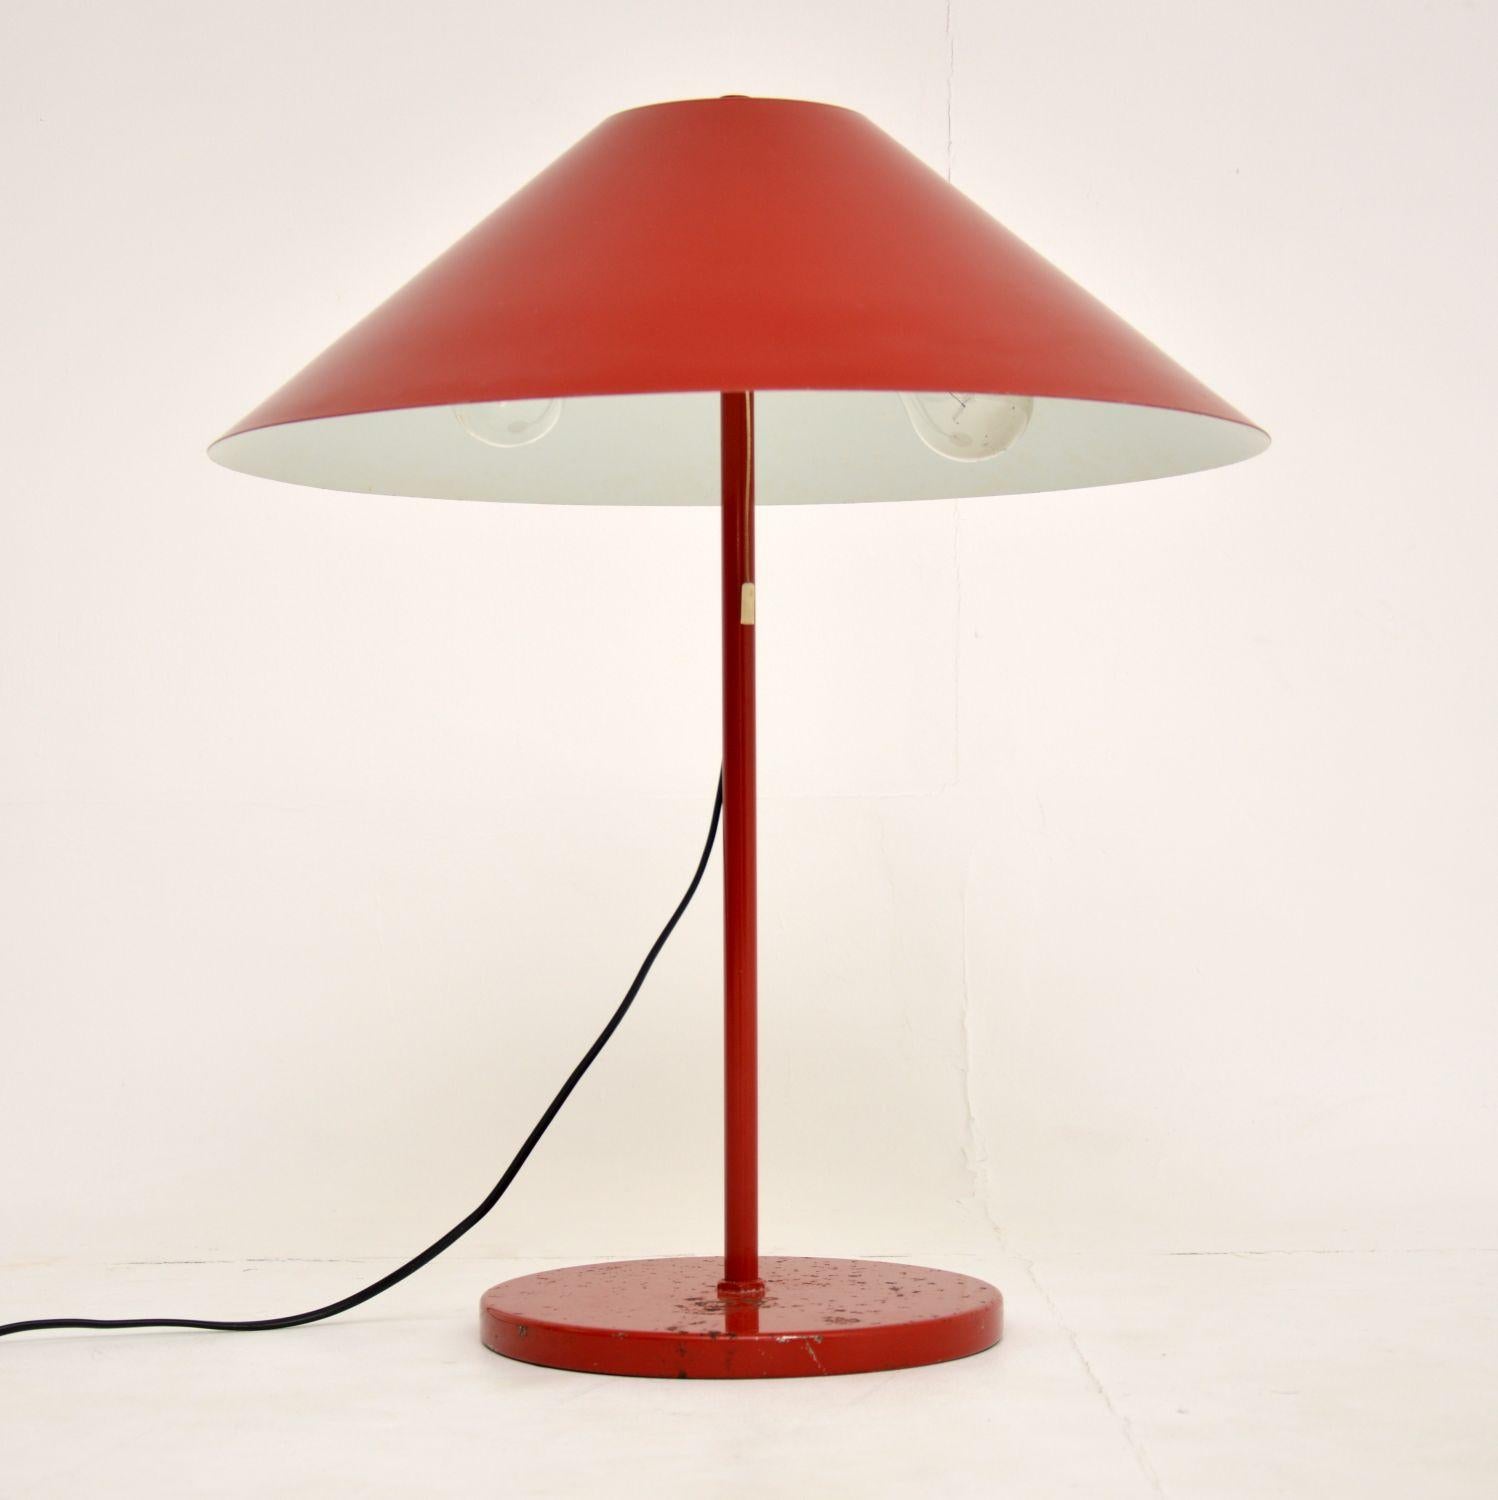 A stylish and interesting vintage Danish table lamp, dating from the 1960s-1970s. This was made by the high end manufacturer ES Horn, it has the original label beneath the base.

This has the beautiful original shade built in, the red lacquered